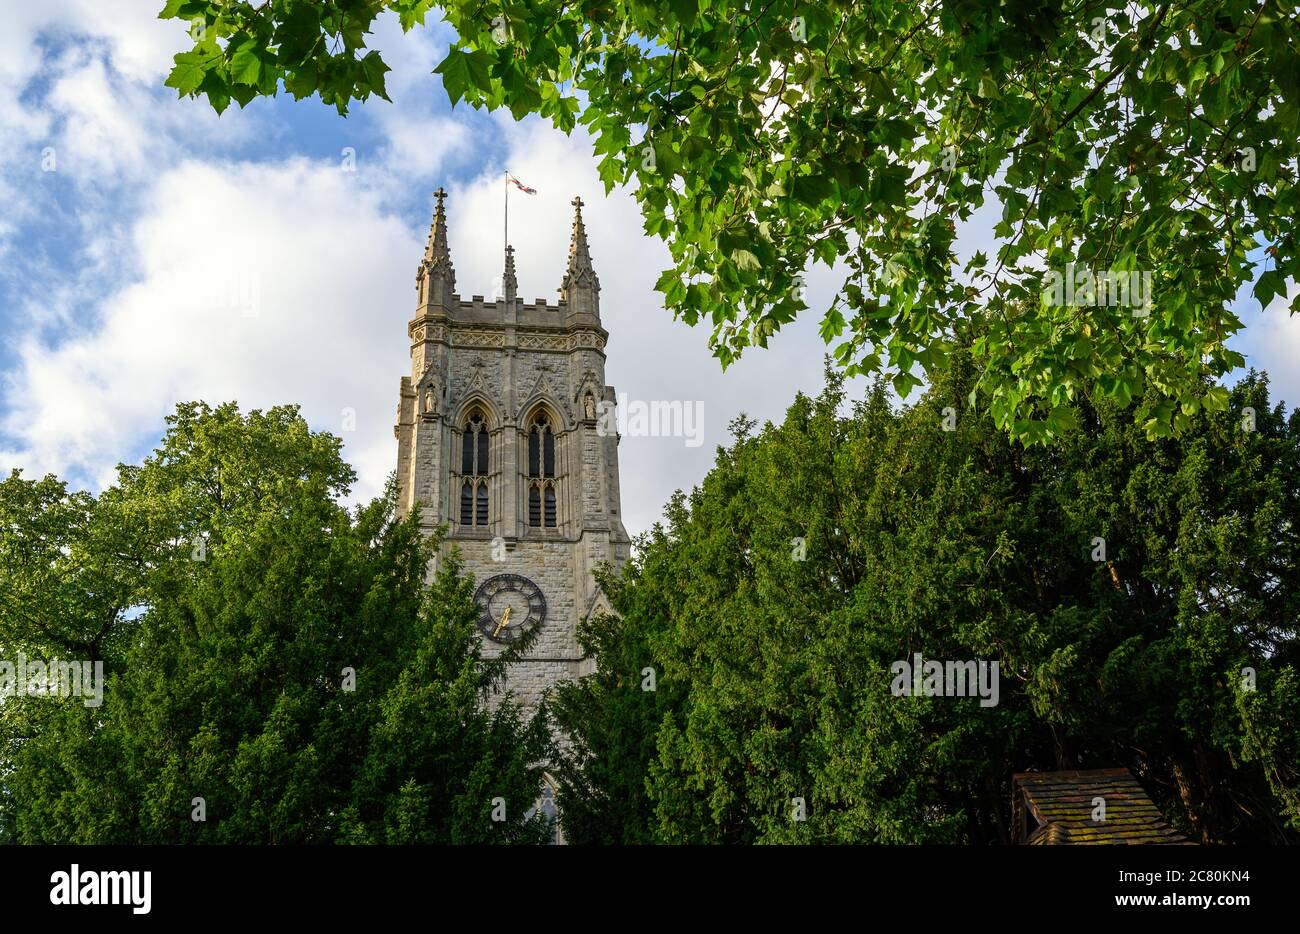 Beckenham (Greater London), Kent, UK. St George's Church in Beckenham with a square tower framed by trees. A Church of England parish church. Stock Photo